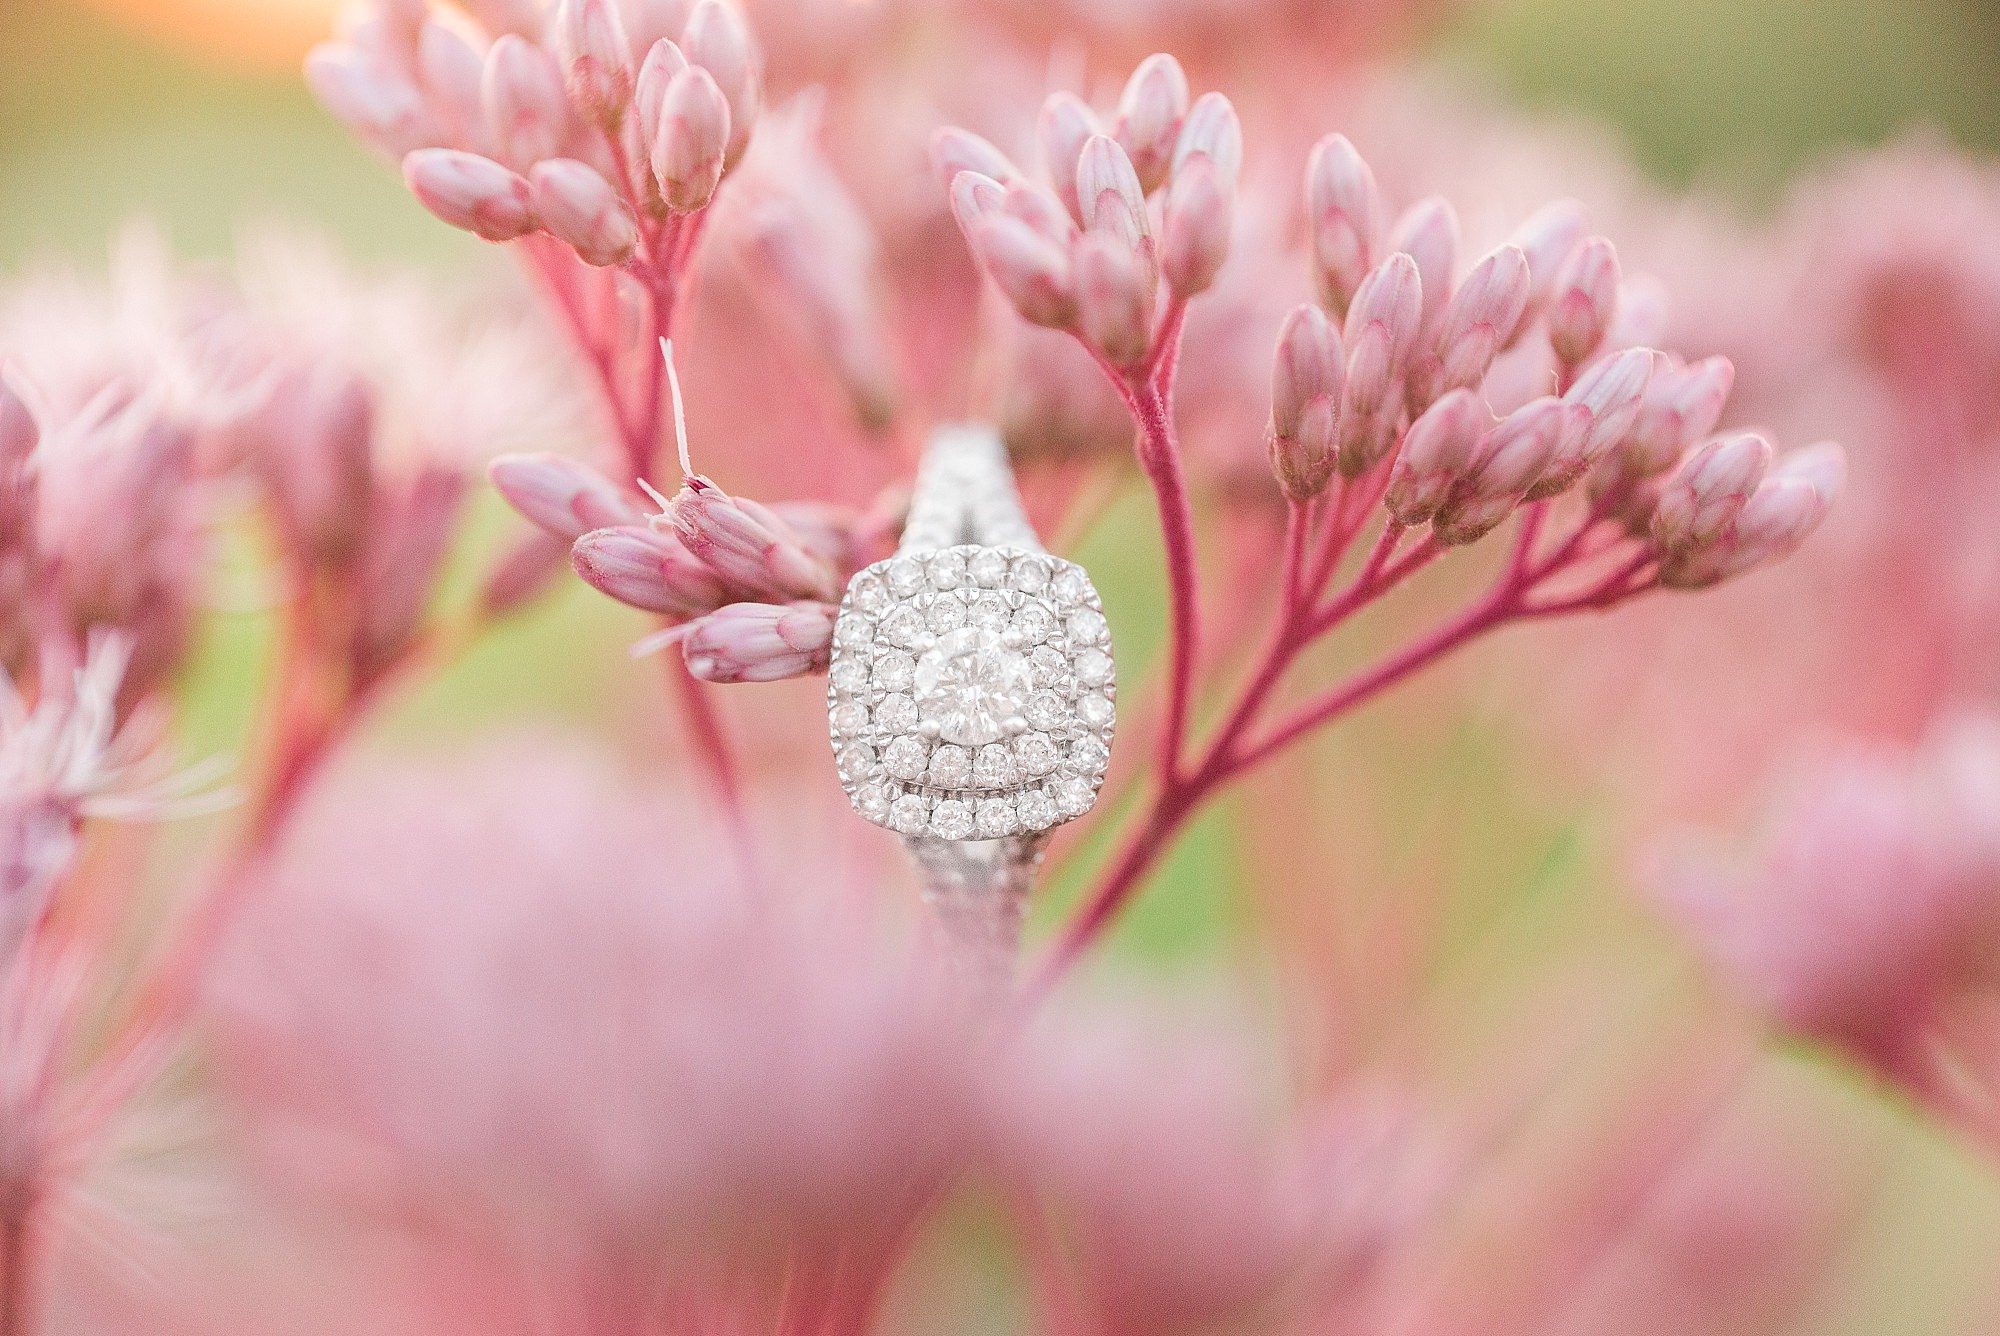 A halo diamond engagement ring rests on small pink flowers